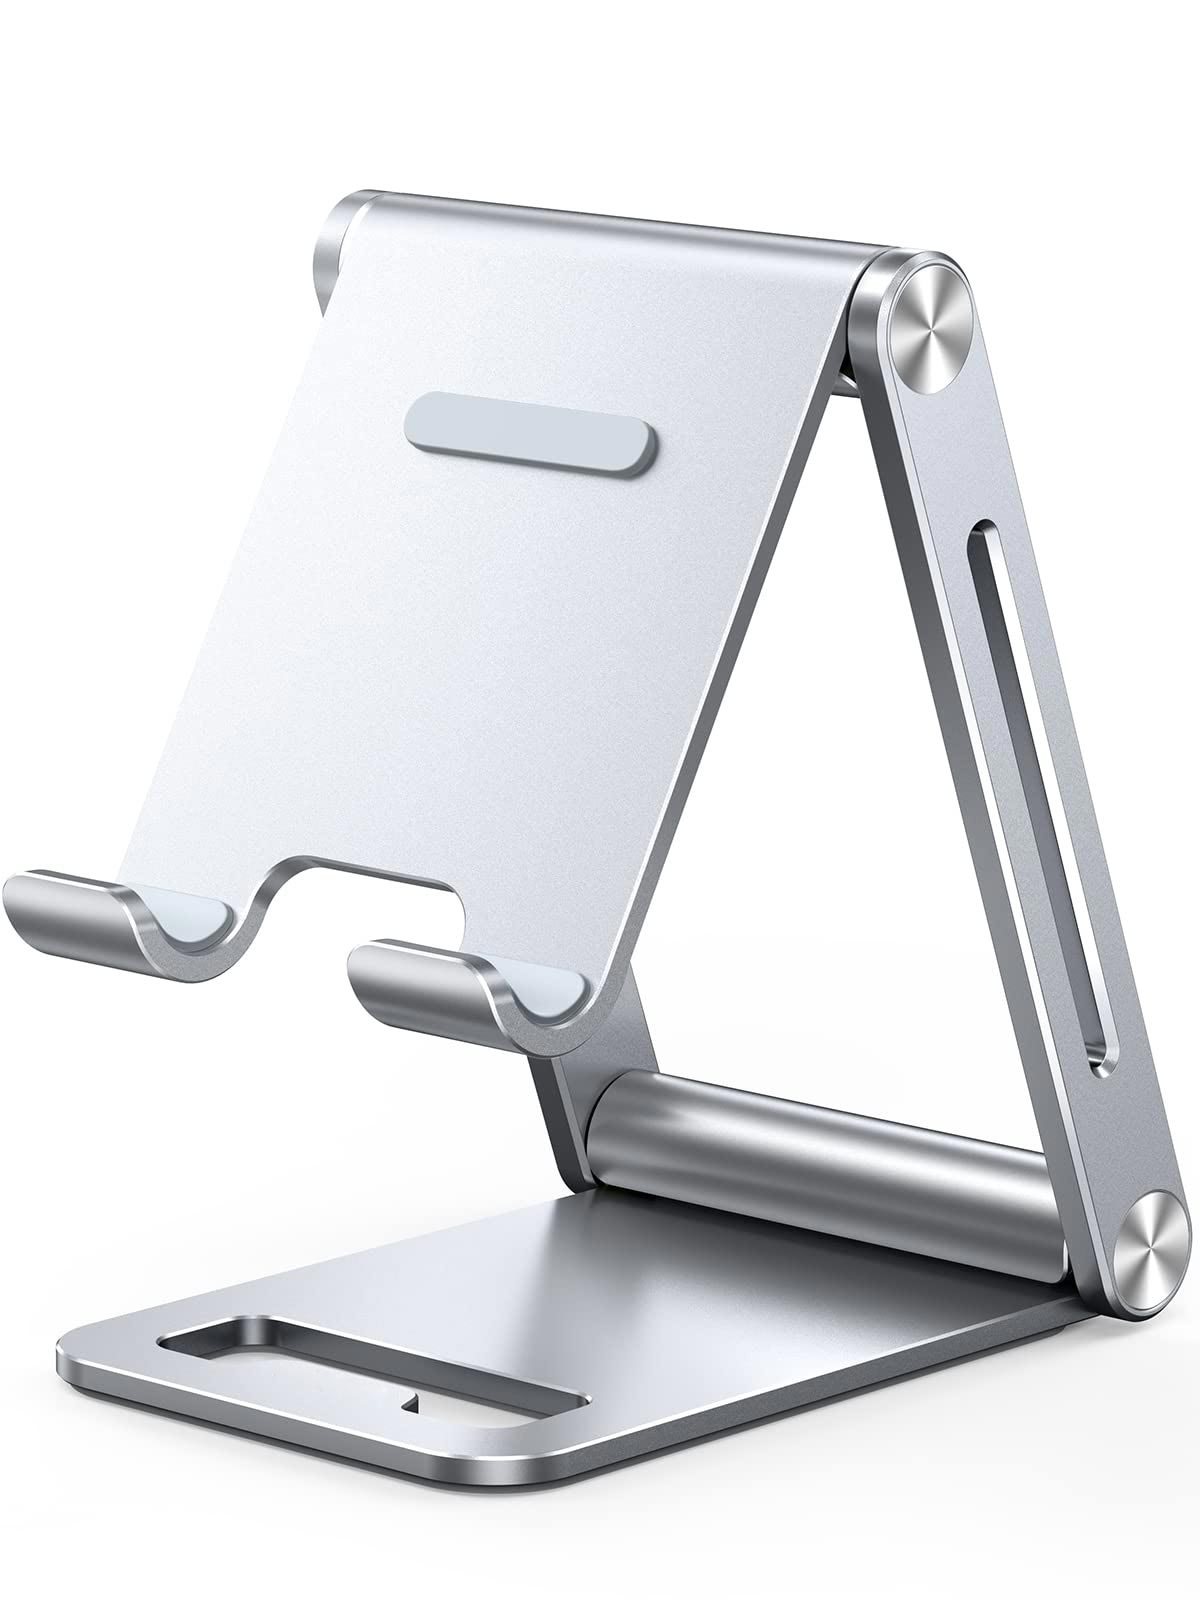 Aluminum Adjustable Portable Phone Stand for Desk Accessories Grey | USBYON.COM